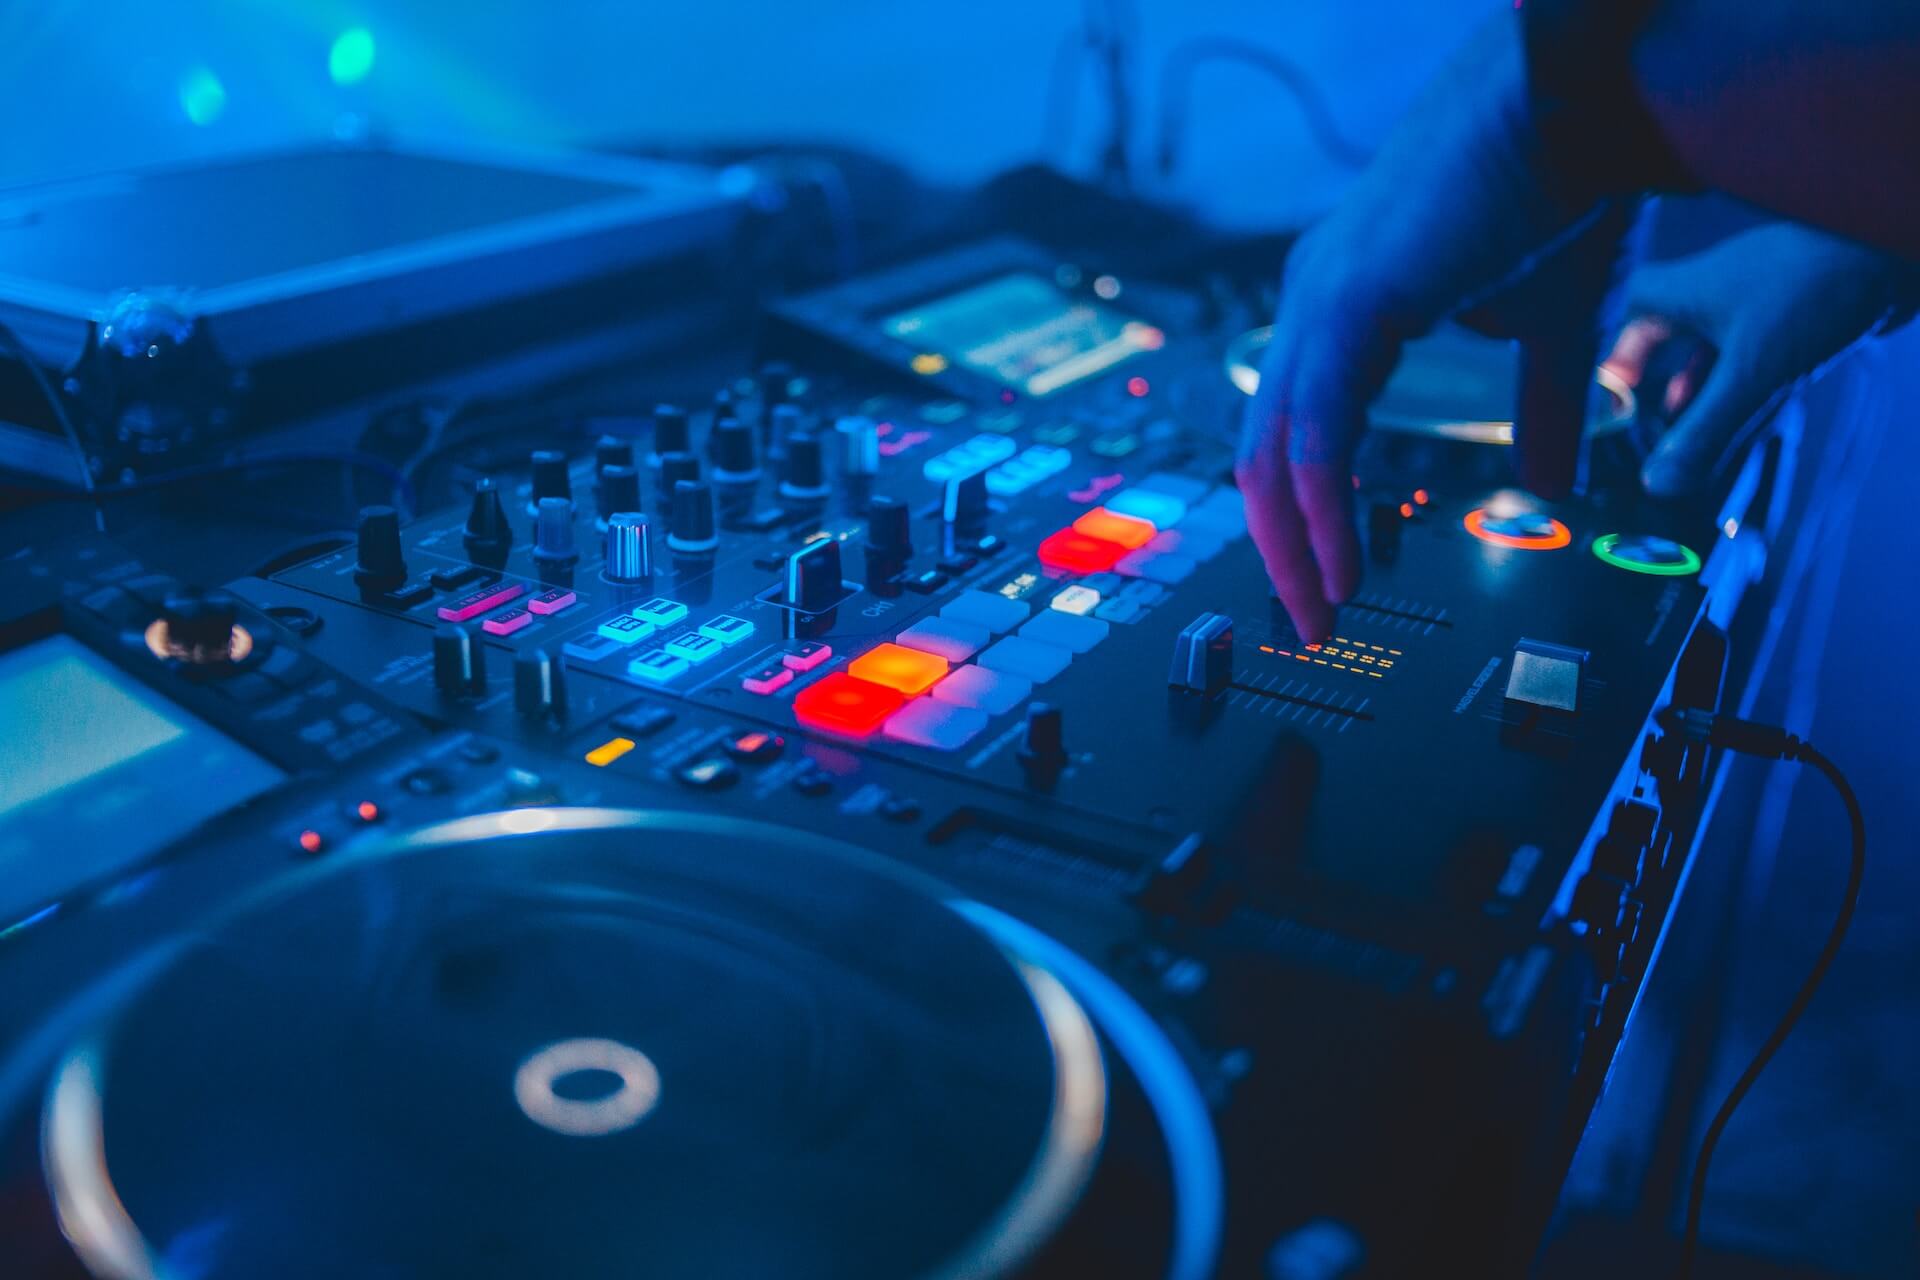 A DJ table with a mixer, turntables, and headphones, with colorful lights pulsating in the background, creating a vibrant atmosphere while trance music fills the air.